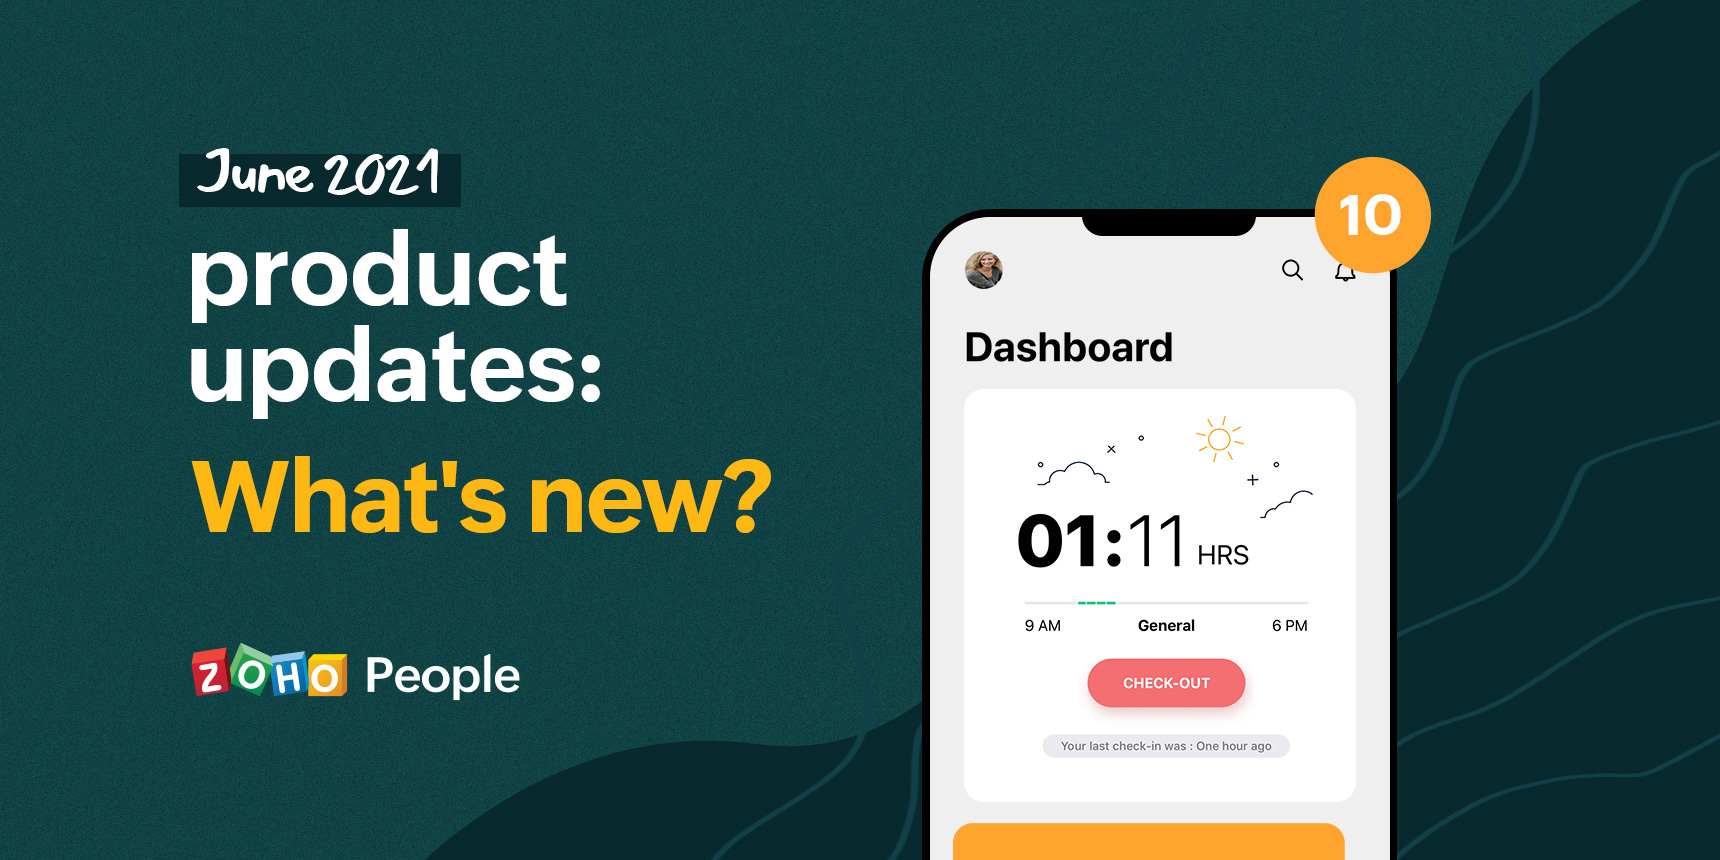 June 2021 - Zoho People product updates